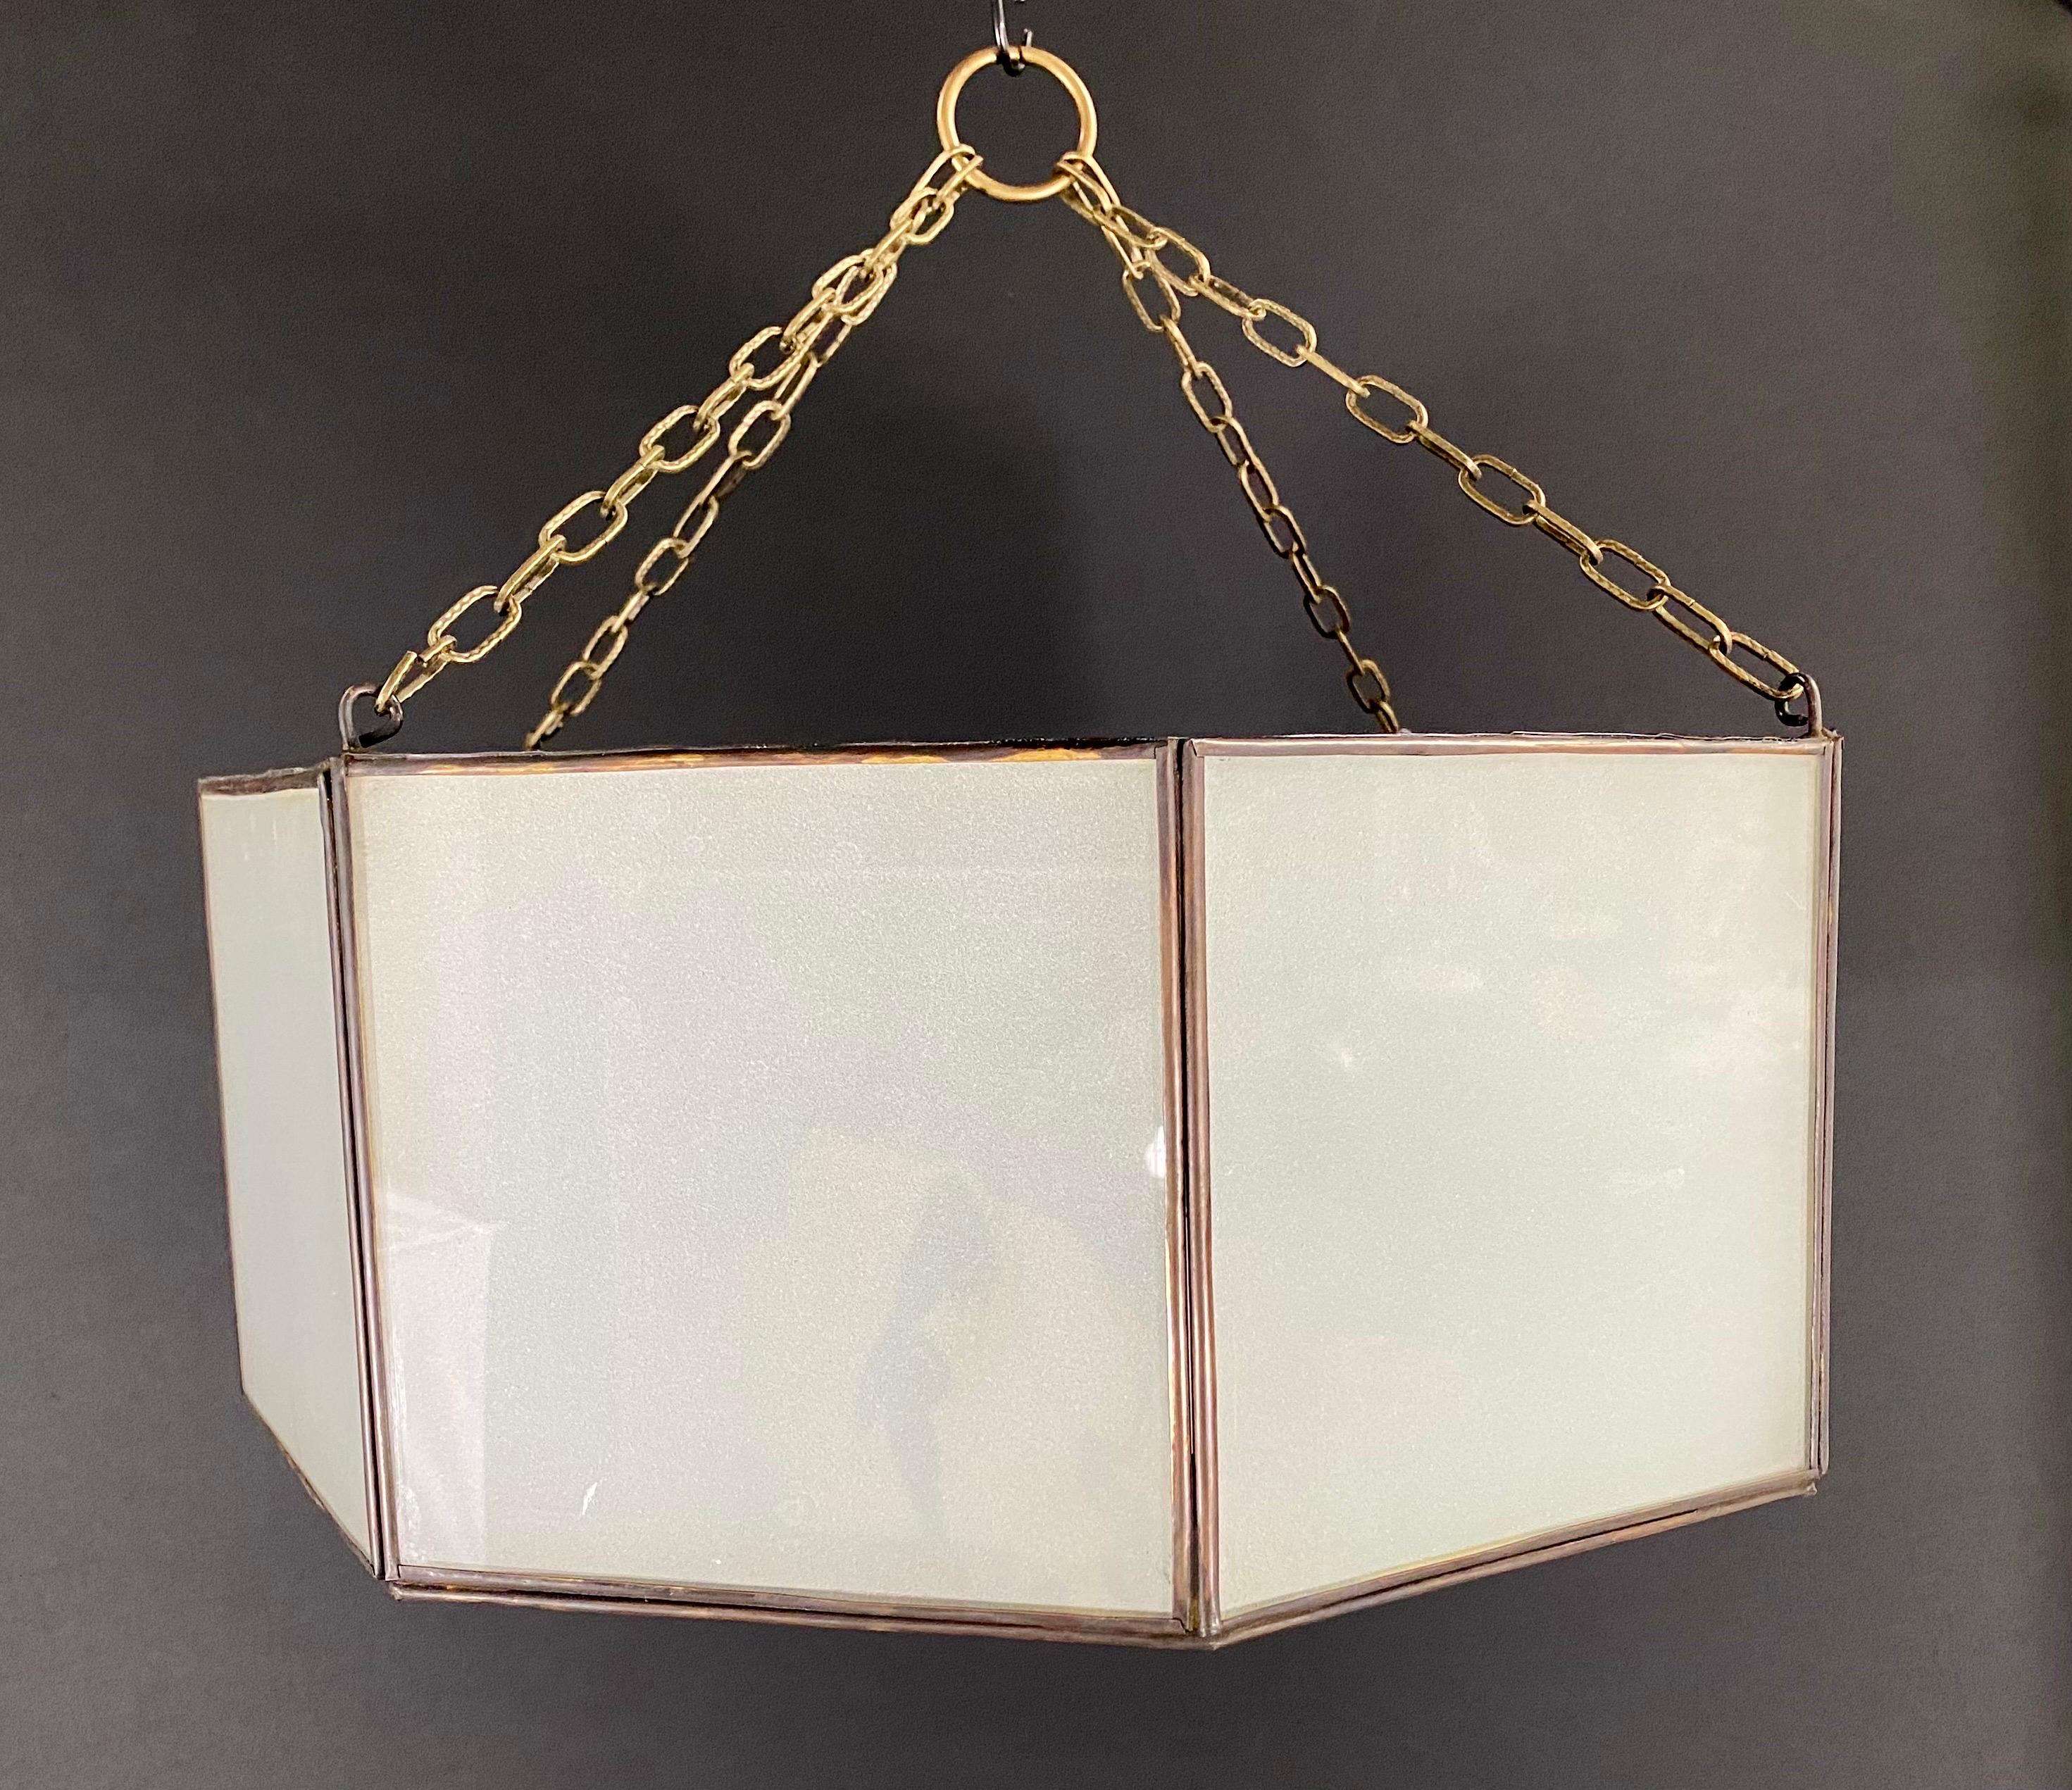 A pair of Art Deco style pendants, lanterns or flush mount. Featuring a stylish octagon shape, the pendants are finely handmade of individual sandblasted frosted milk glass panels and patinated bronze frame. The octagonal shaped pendants have a